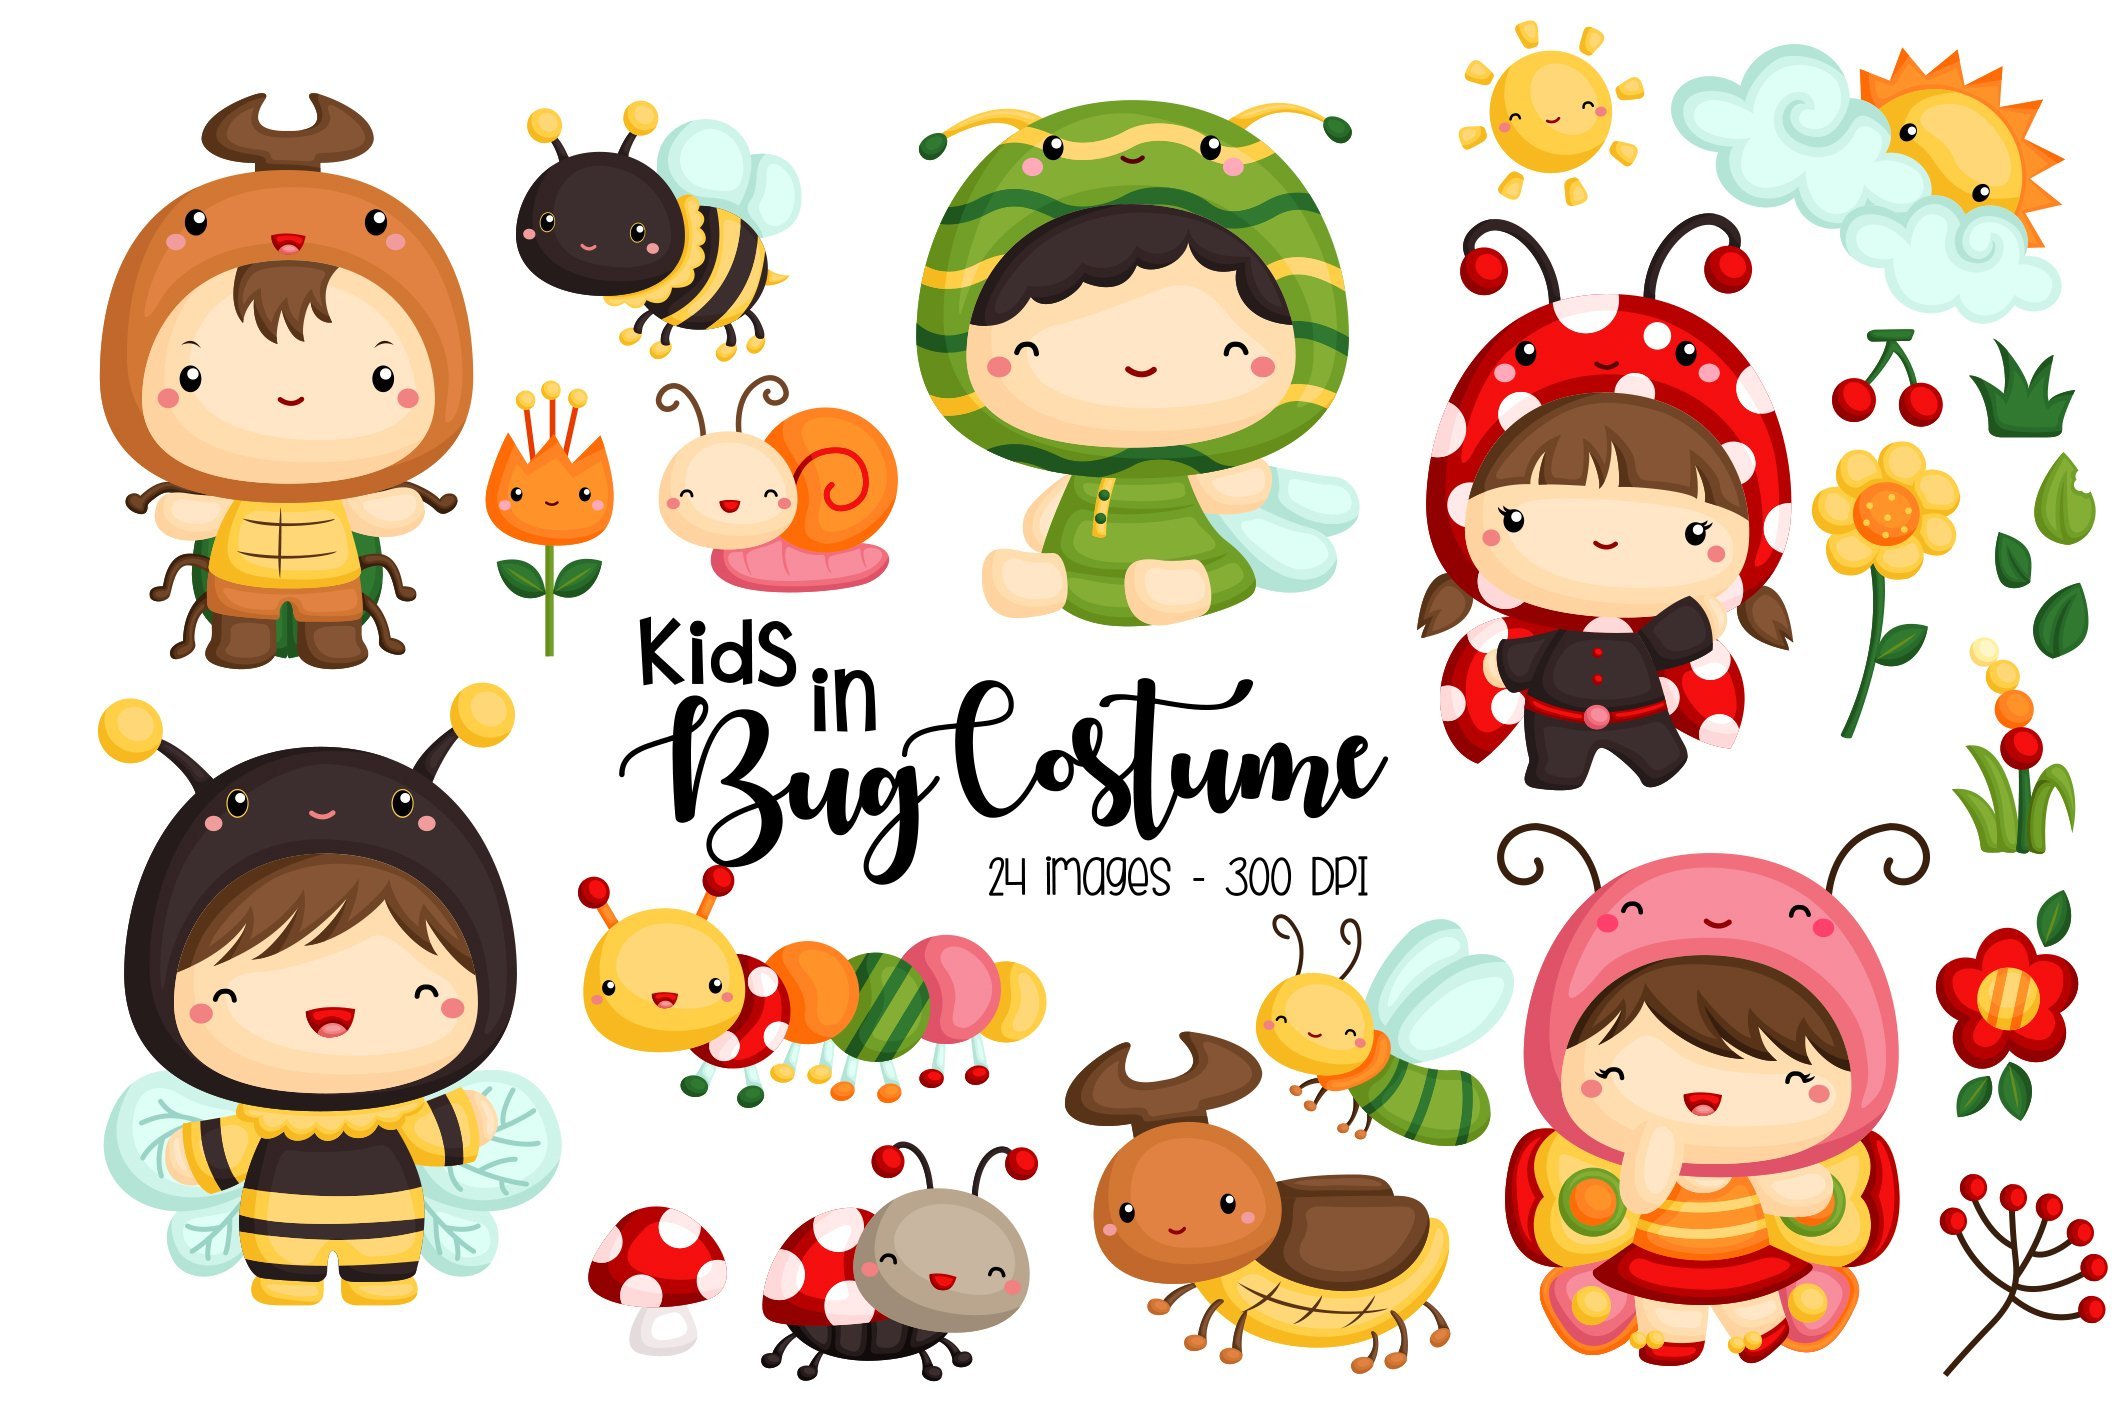 Kids in a Bug Costume Clipart cover image.